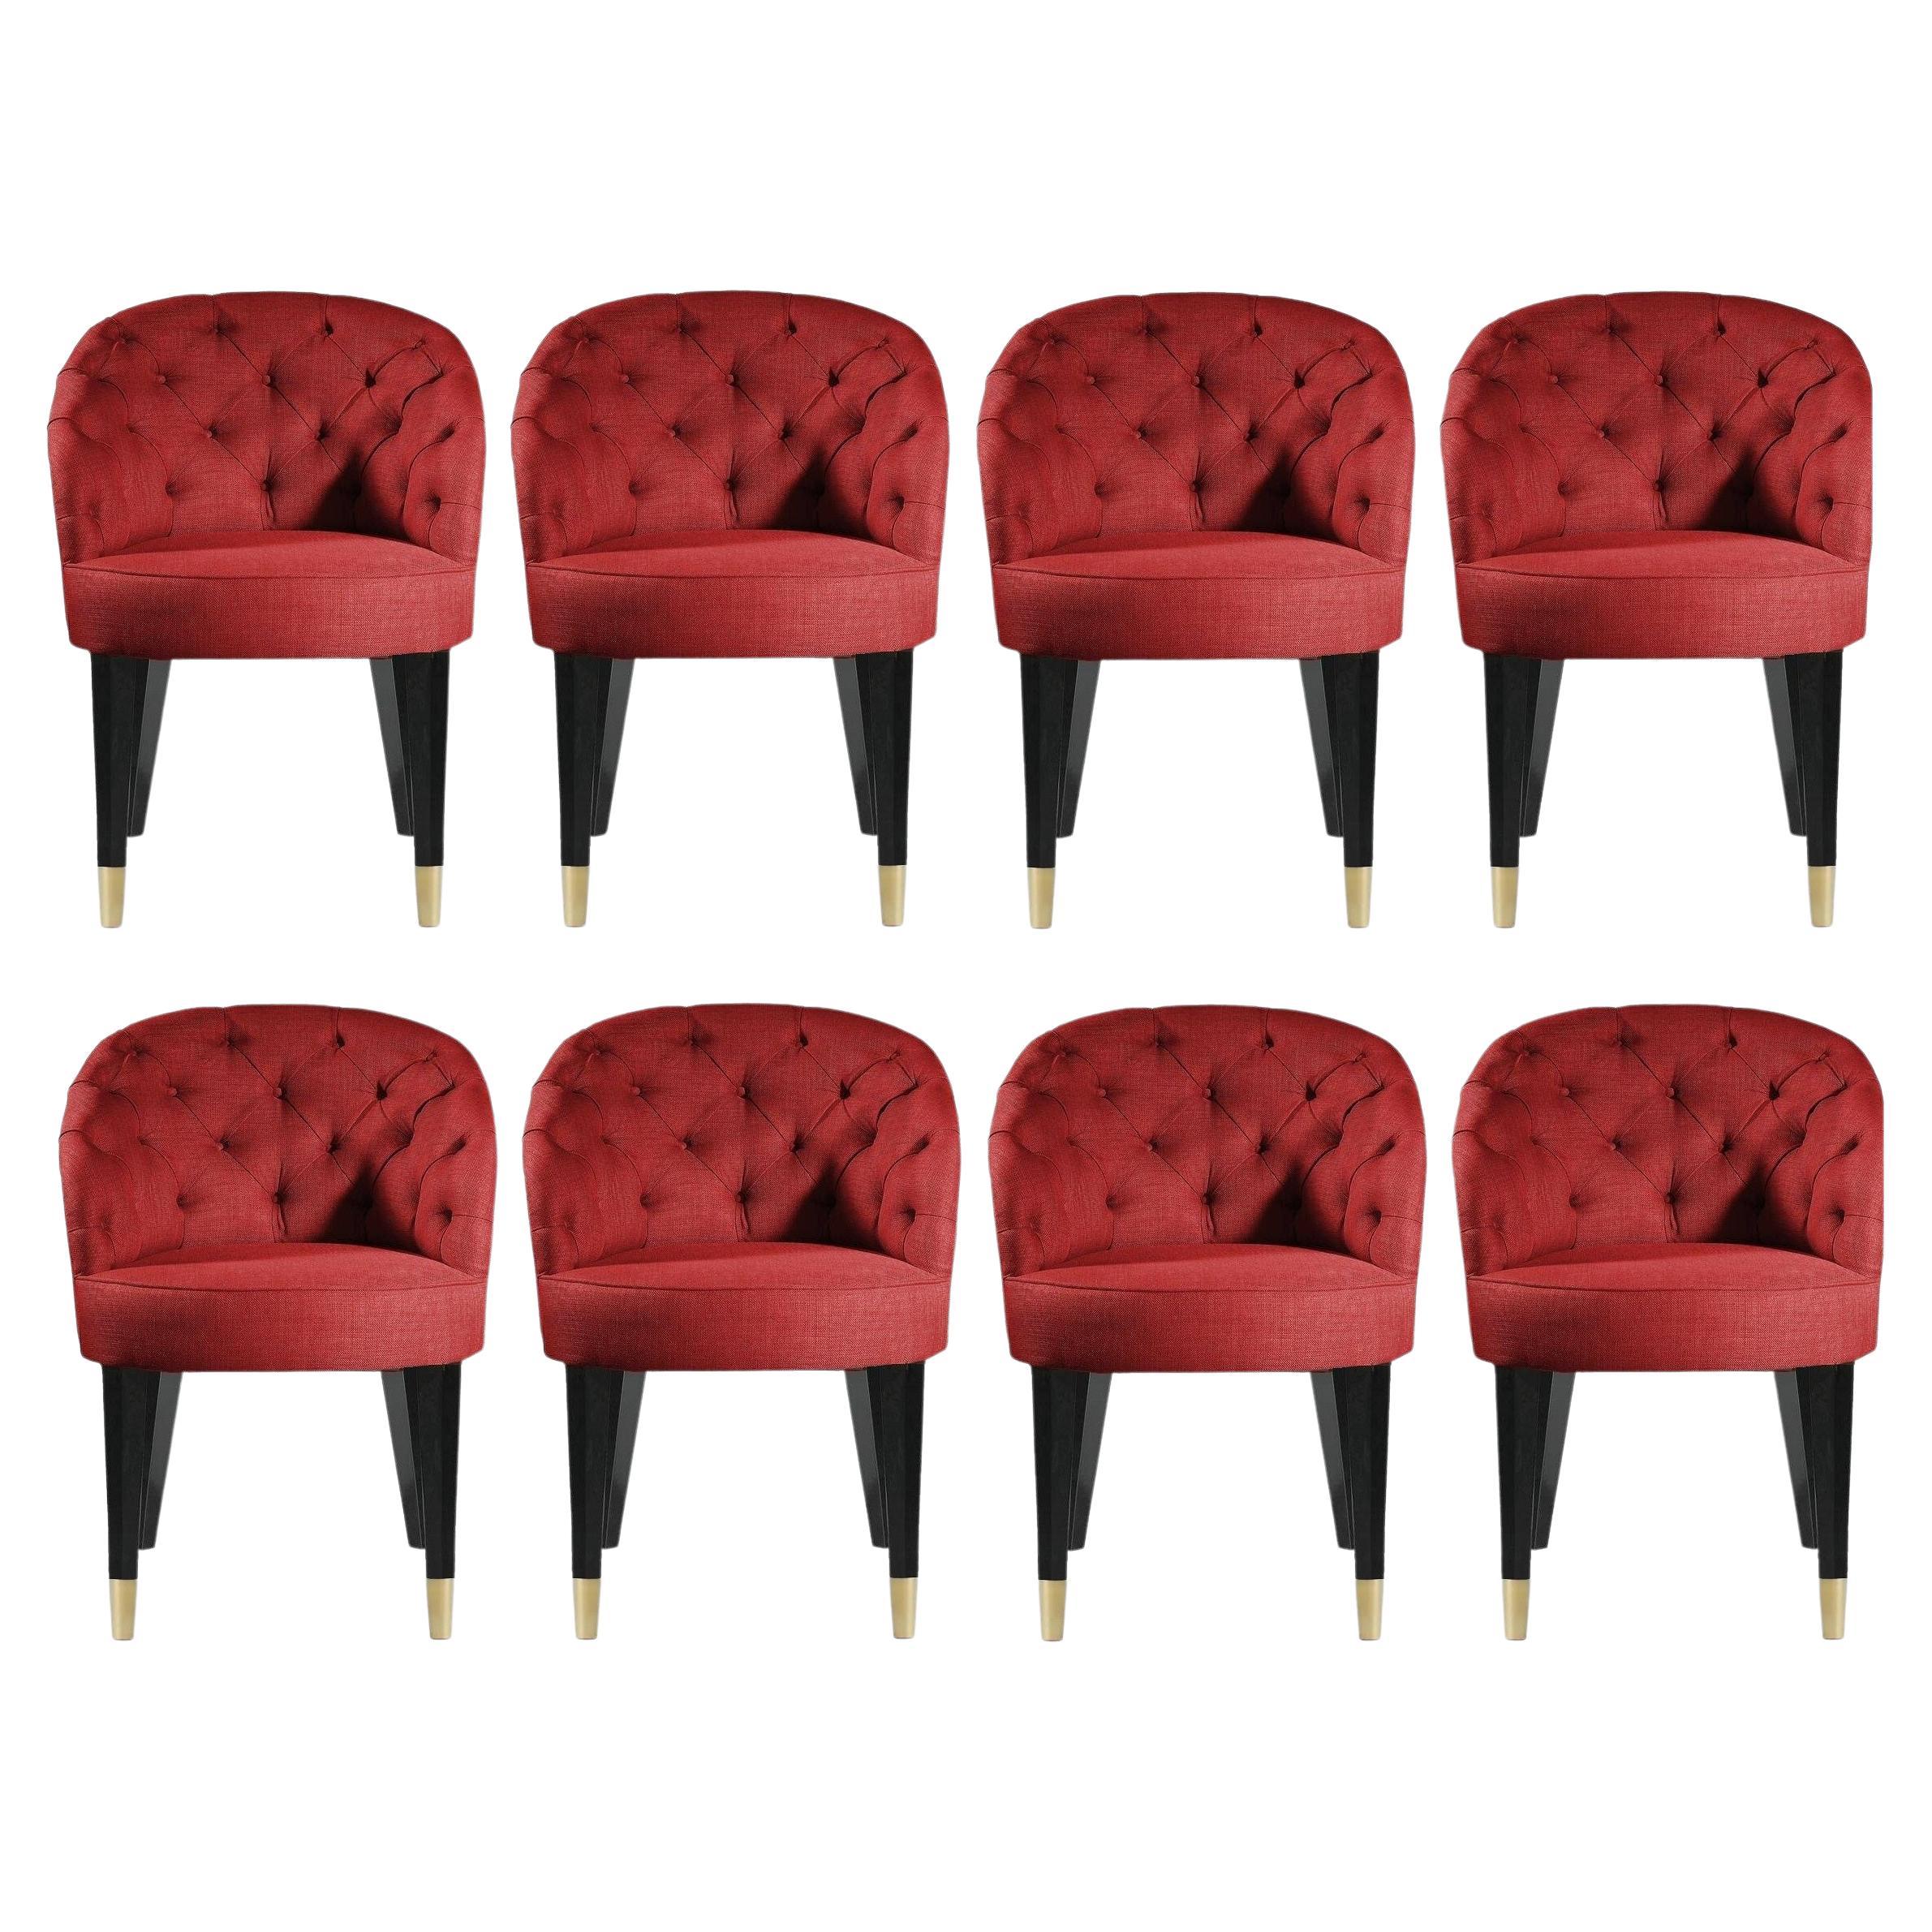 Contemporary Buttoned Back Style Dining Chairs, Set of 8